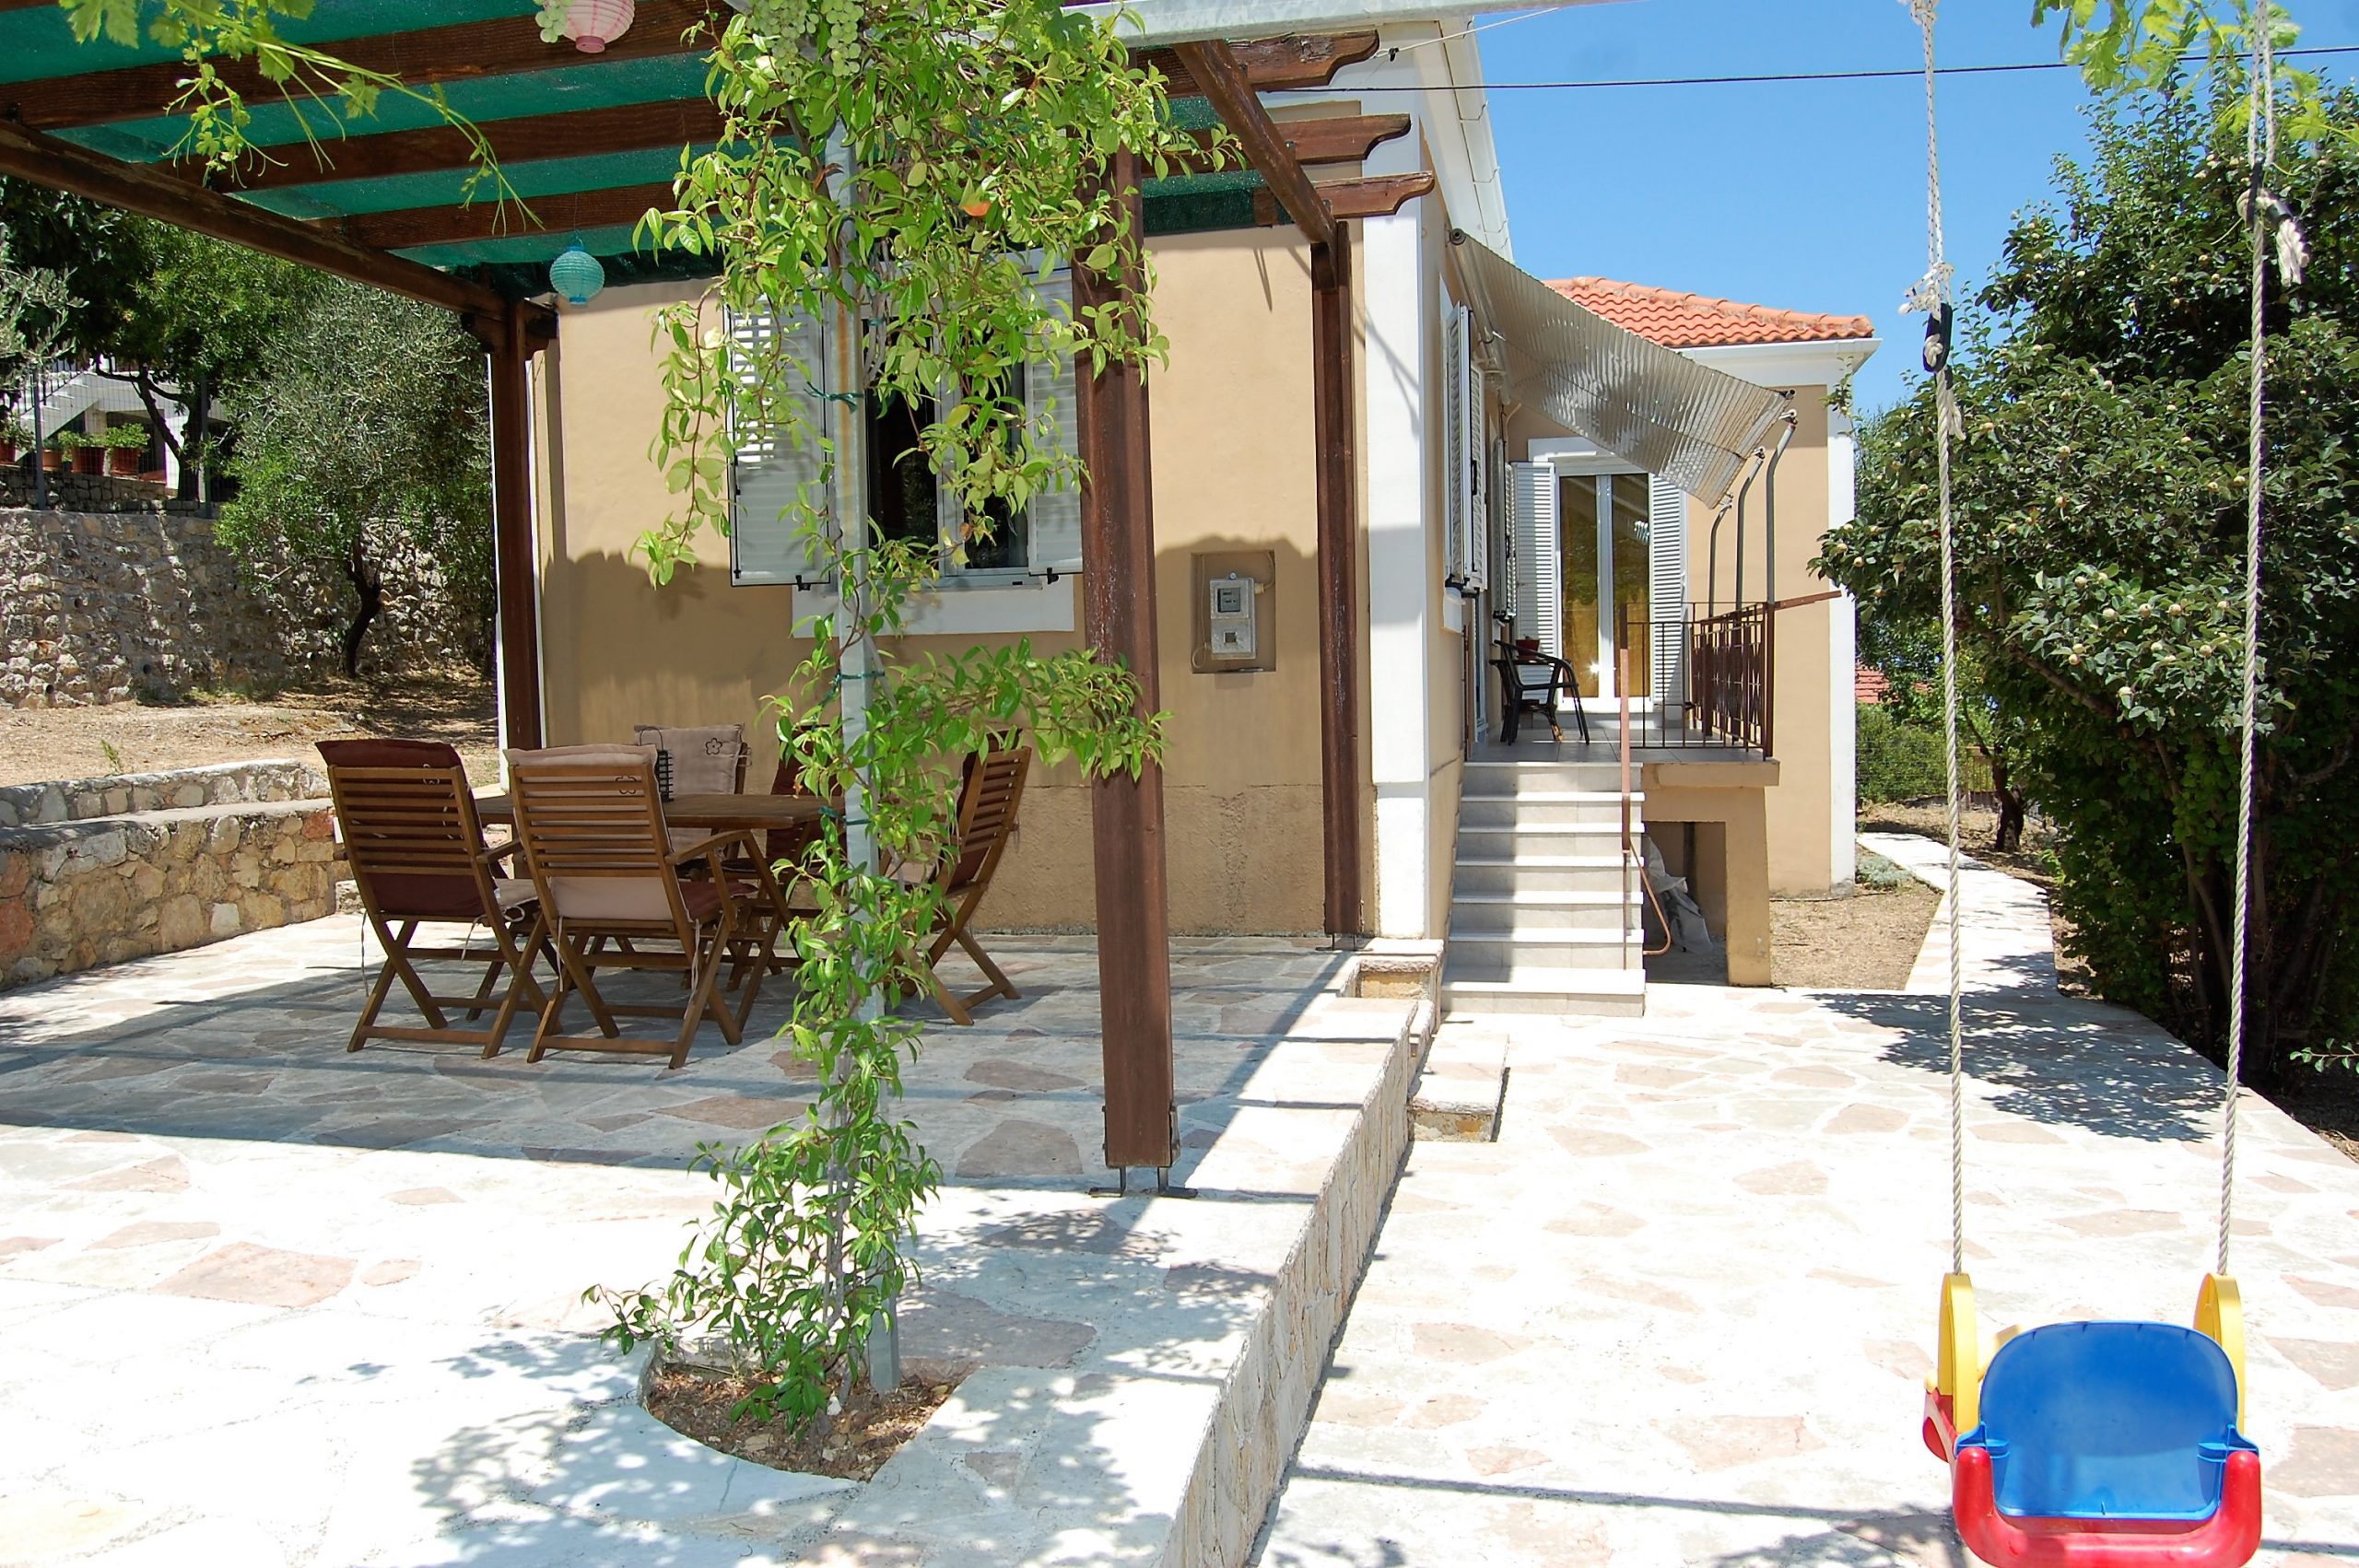 Entrance and terrace of rental property in Perachori Ithaca Greece